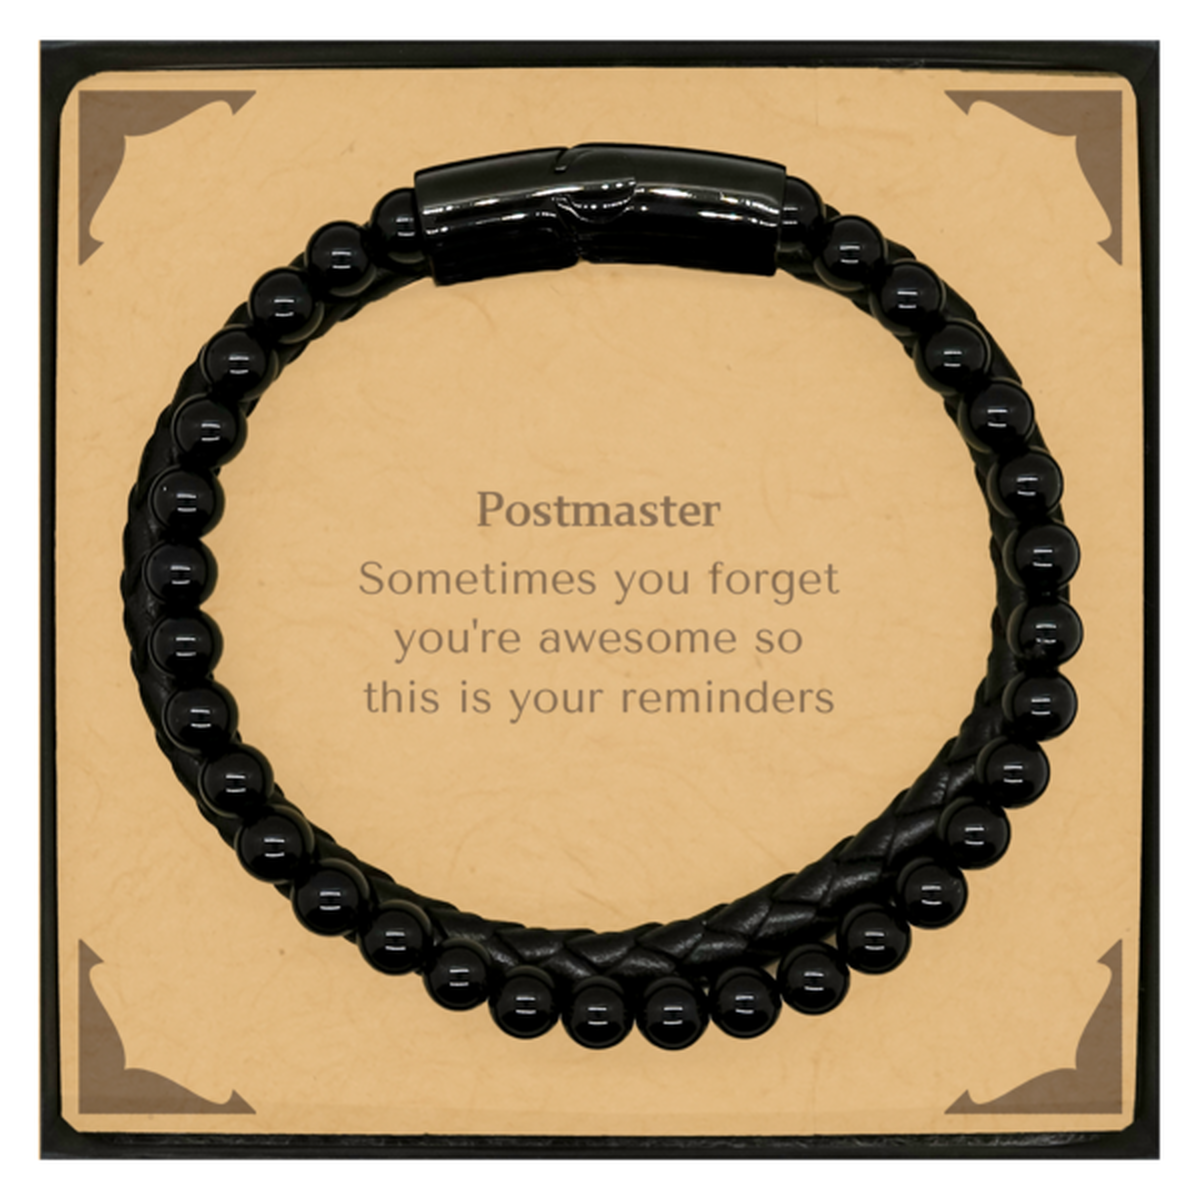 Sentimental Postmaster Stone Leather Bracelets, Postmaster Sometimes you forget you're awesome so this is your reminders, Graduation Christmas Birthday Gifts for Postmaster, Men, Women, Coworkers